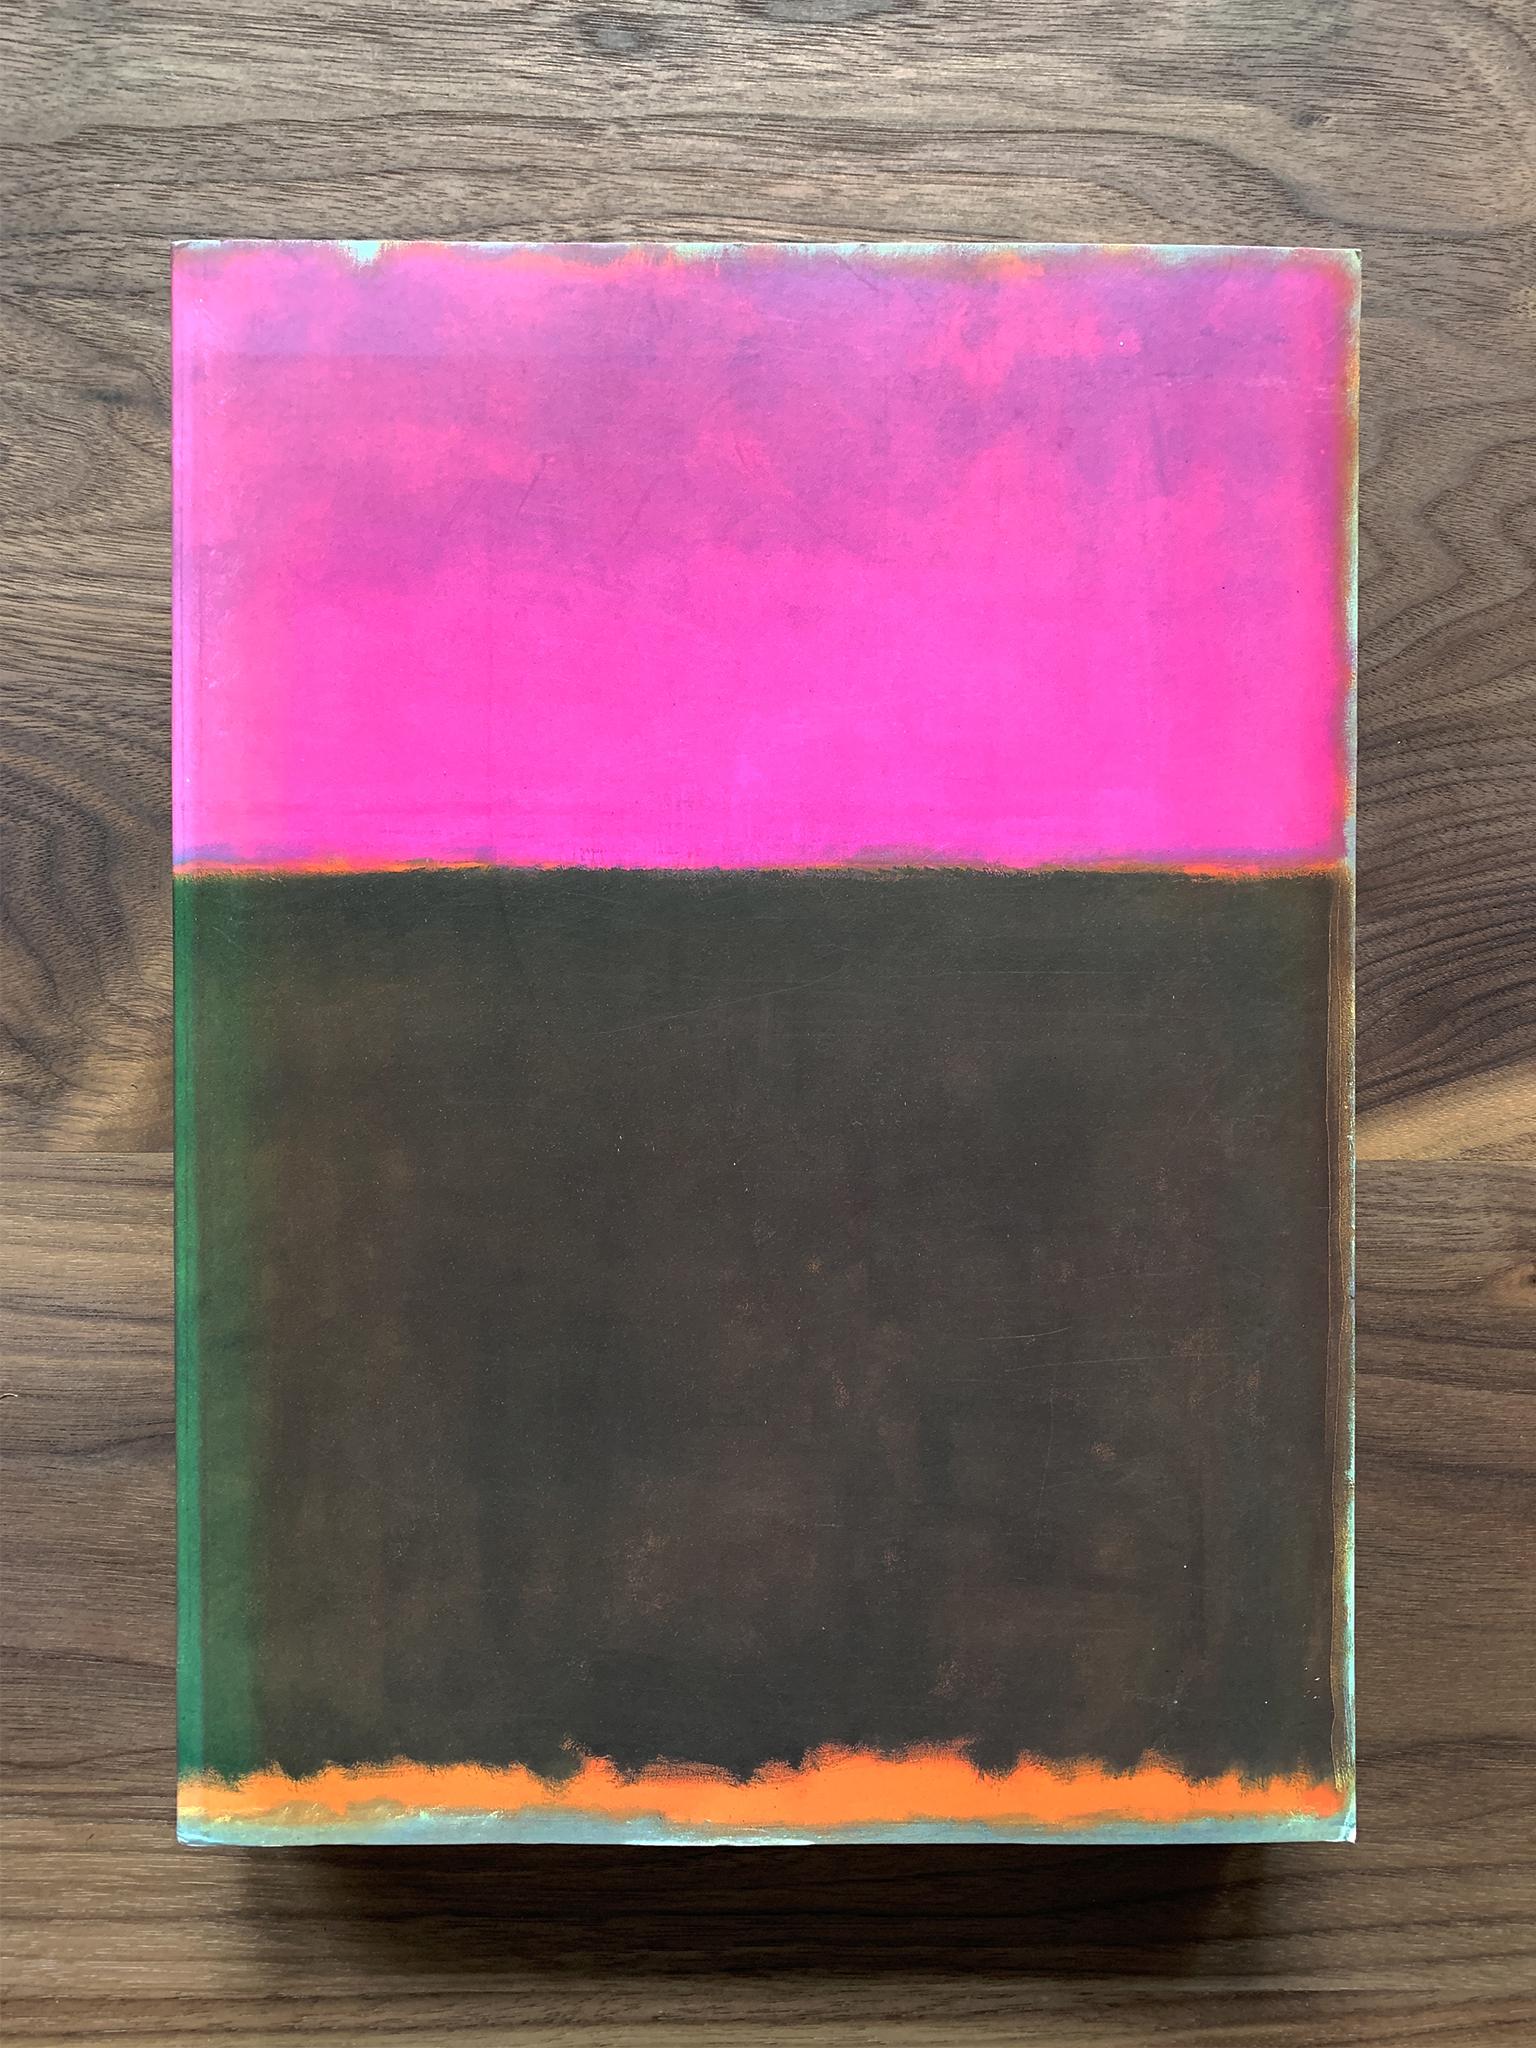 The paintings of Mark Rothko (1903-1970) have become iconic for their luminous colors and commanding presence. This monograph accompanied a traveling retrospective exhibition dedicated to the artist's work in 1998-1999. It's truly a beautiful book